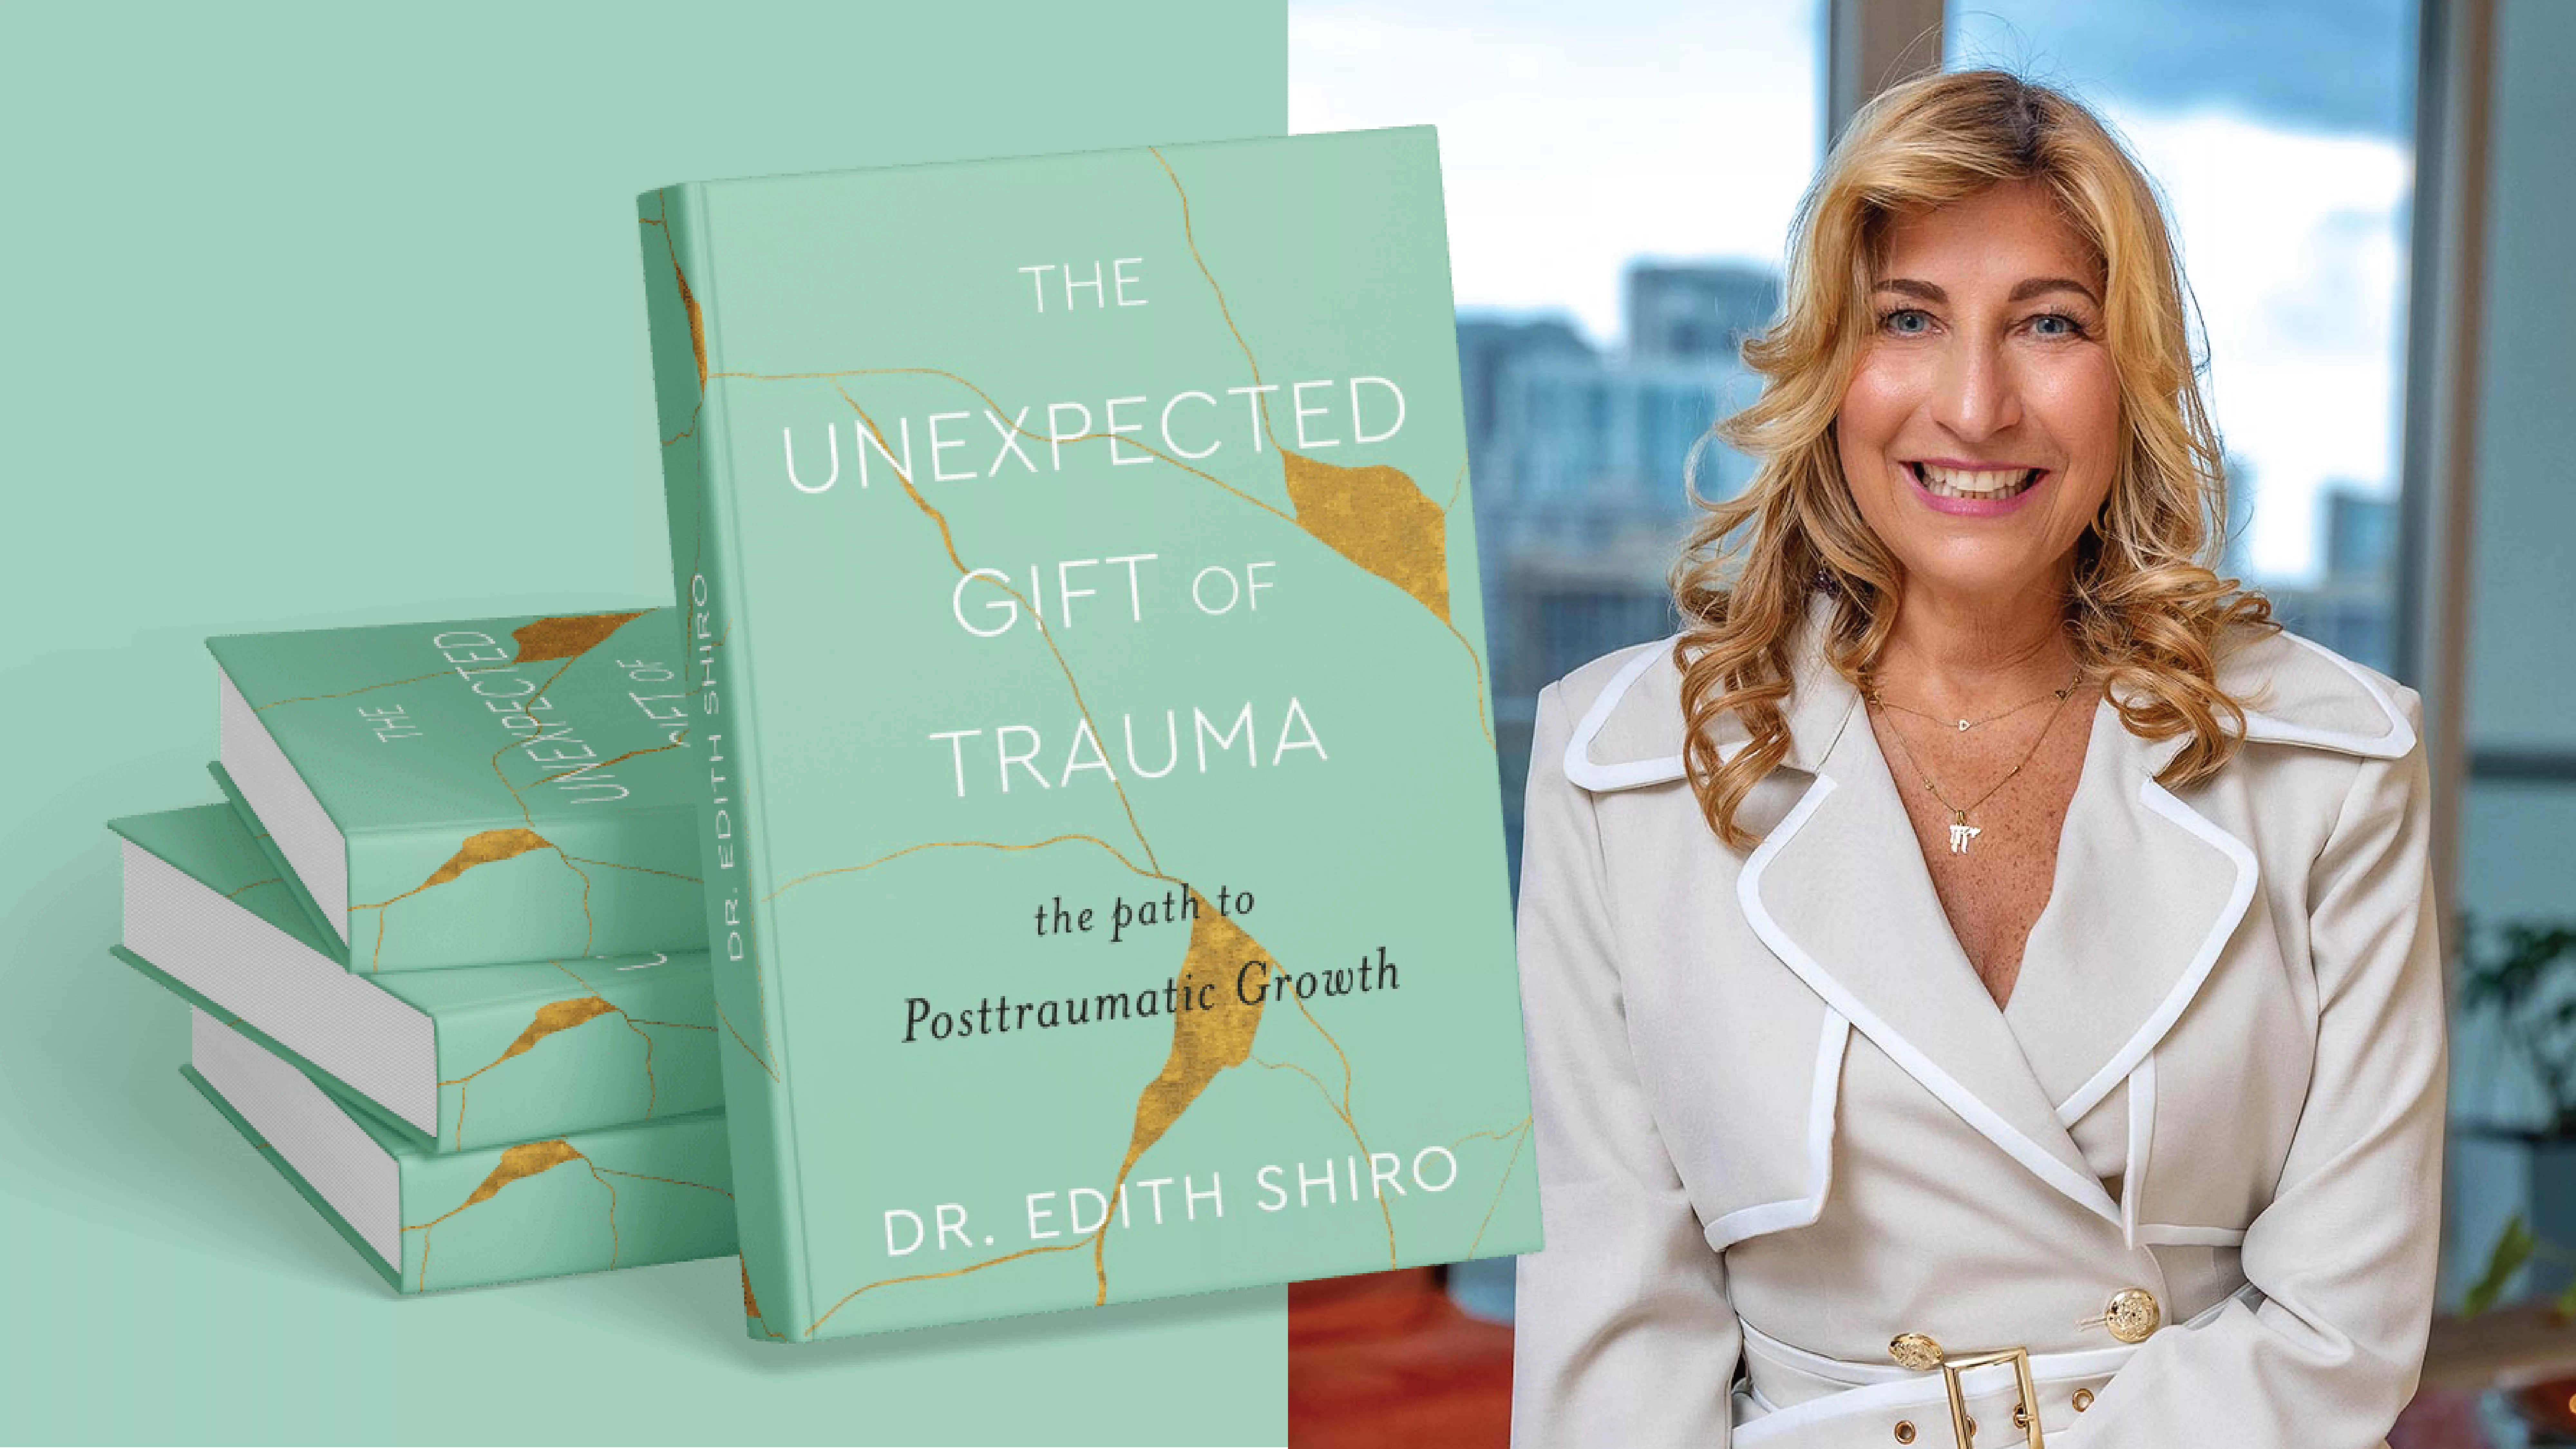 The unexpected gift of trauma dr. edith shiro woman smiling web banner